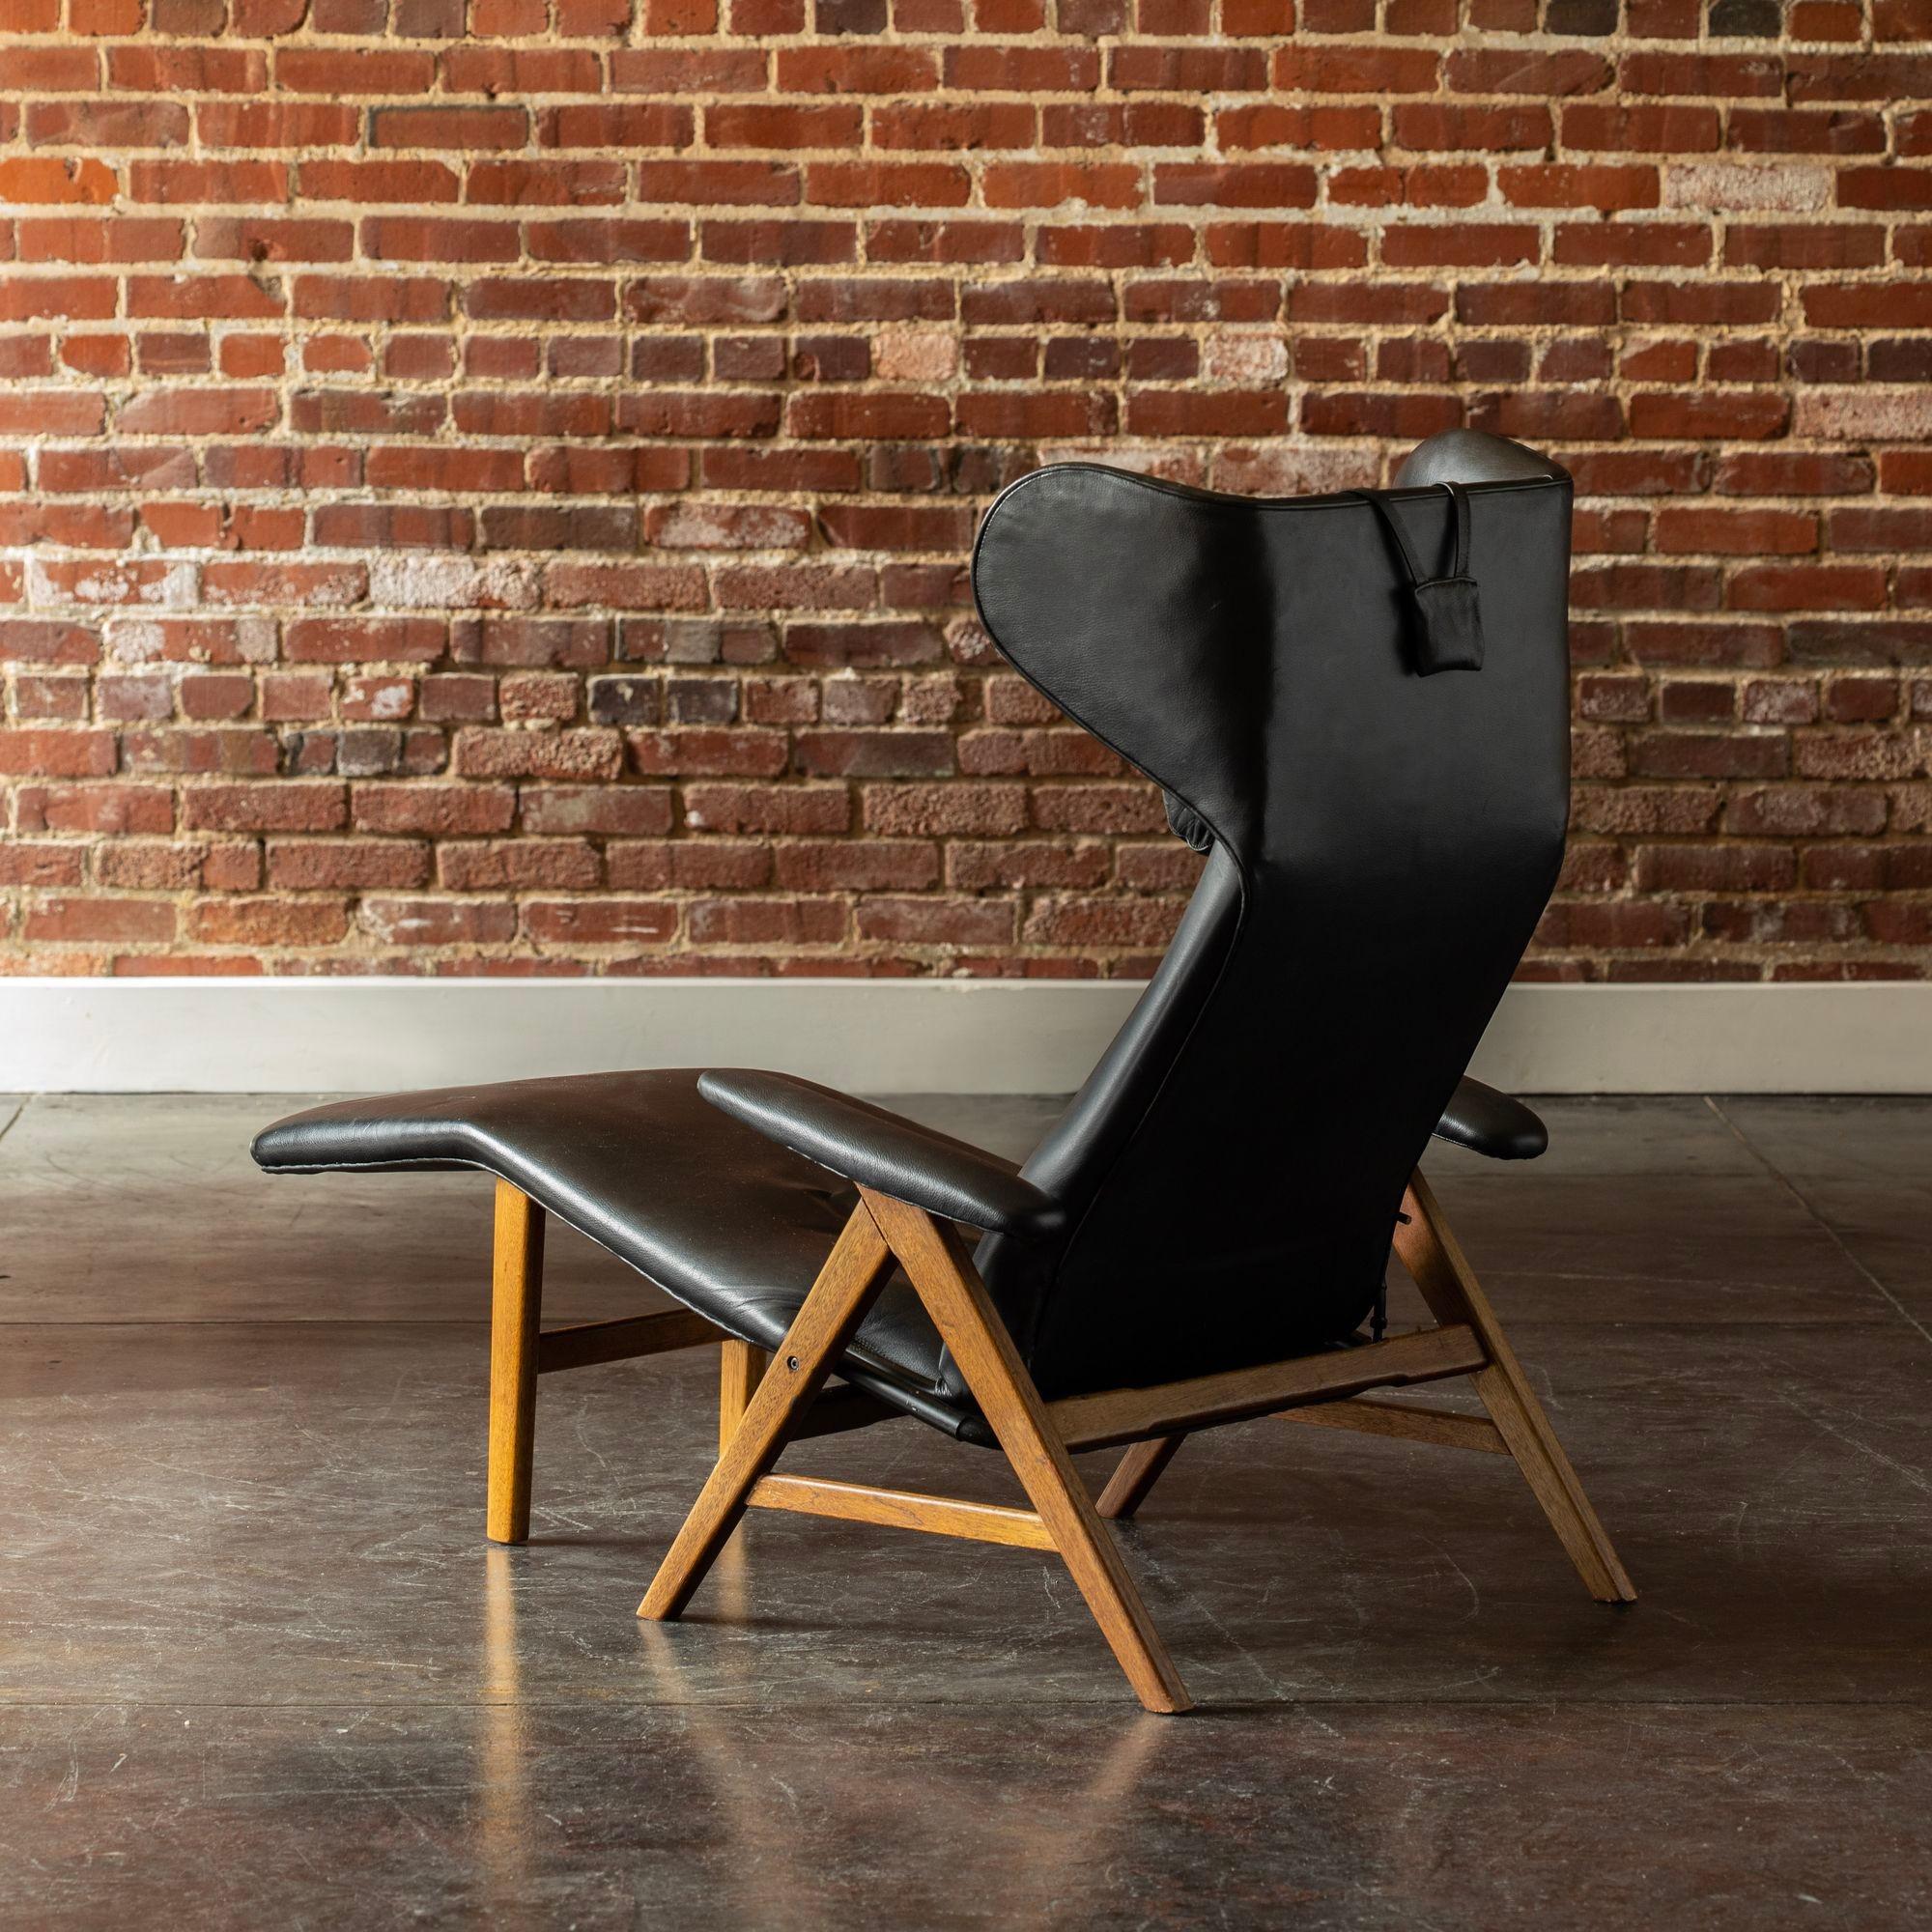 Reclining chair in oak with tilt function designed by Henry W. Klein and manufactured by Bramin Møbler, Denmark, 1960s. In original black leather.
H 39 in x W 30 in x D 55.5 in
H 99.06 cm x W 76.2 cm x D 140.97 cm
Seat Height: 13.5 in 34.29 cm.